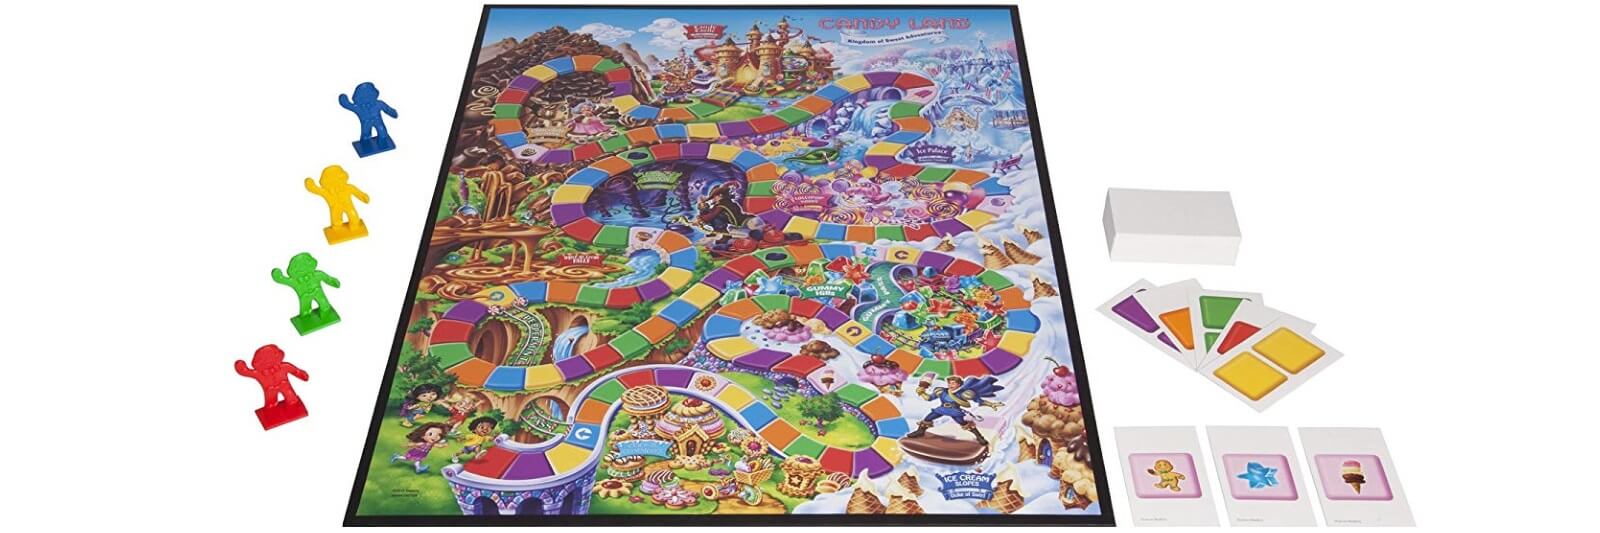 candyland-board-game-review-rules-instructions